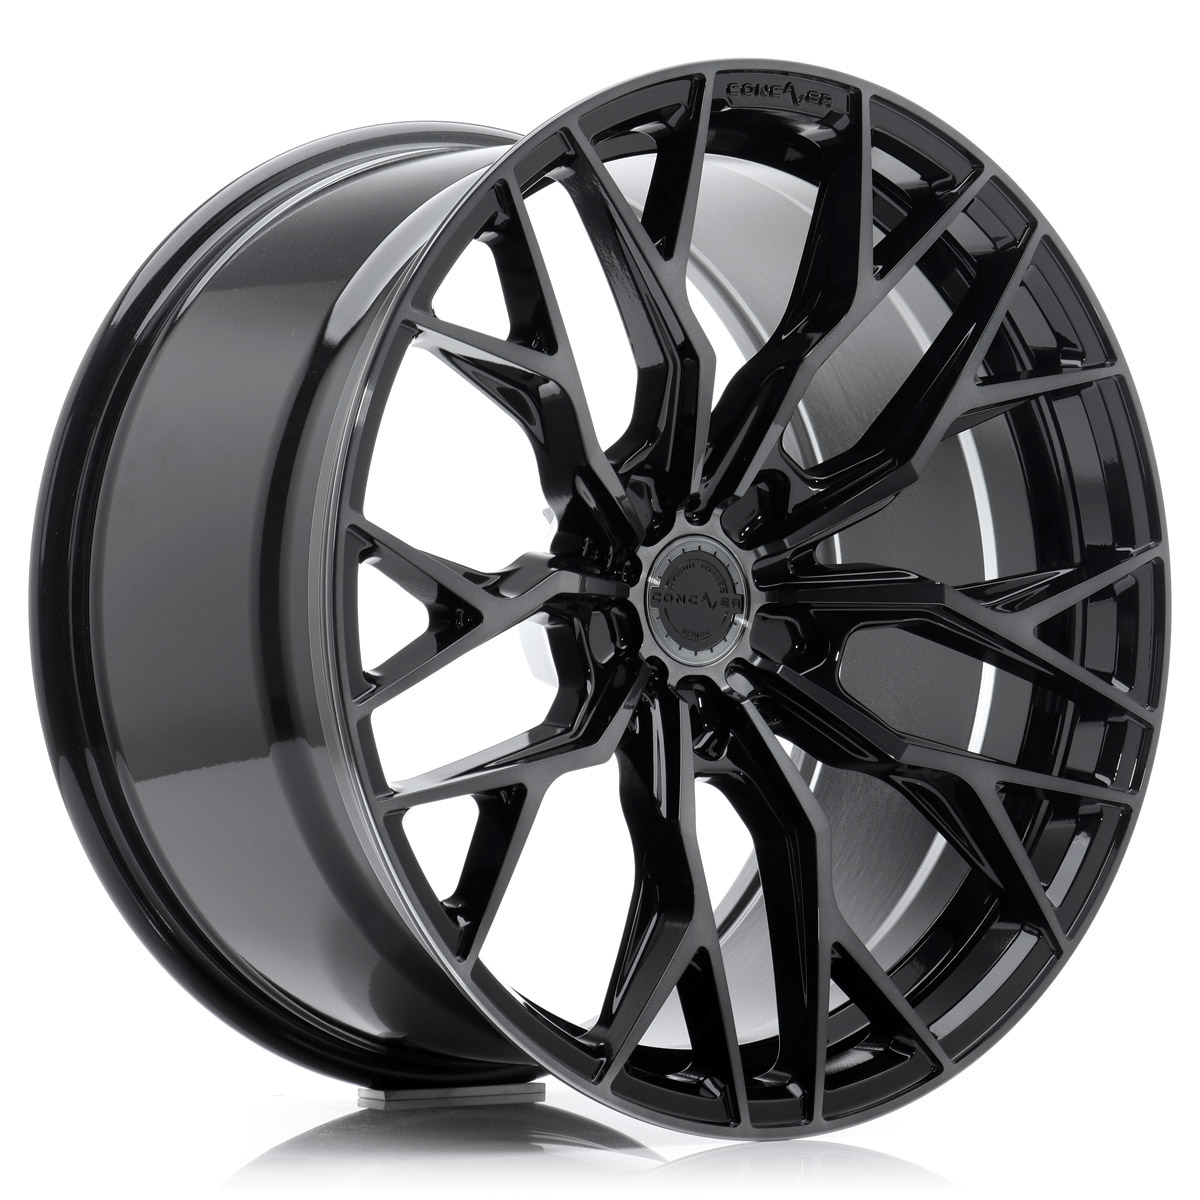 Concaver CVR1 21" Staggered - Double Tinted Black - Model S